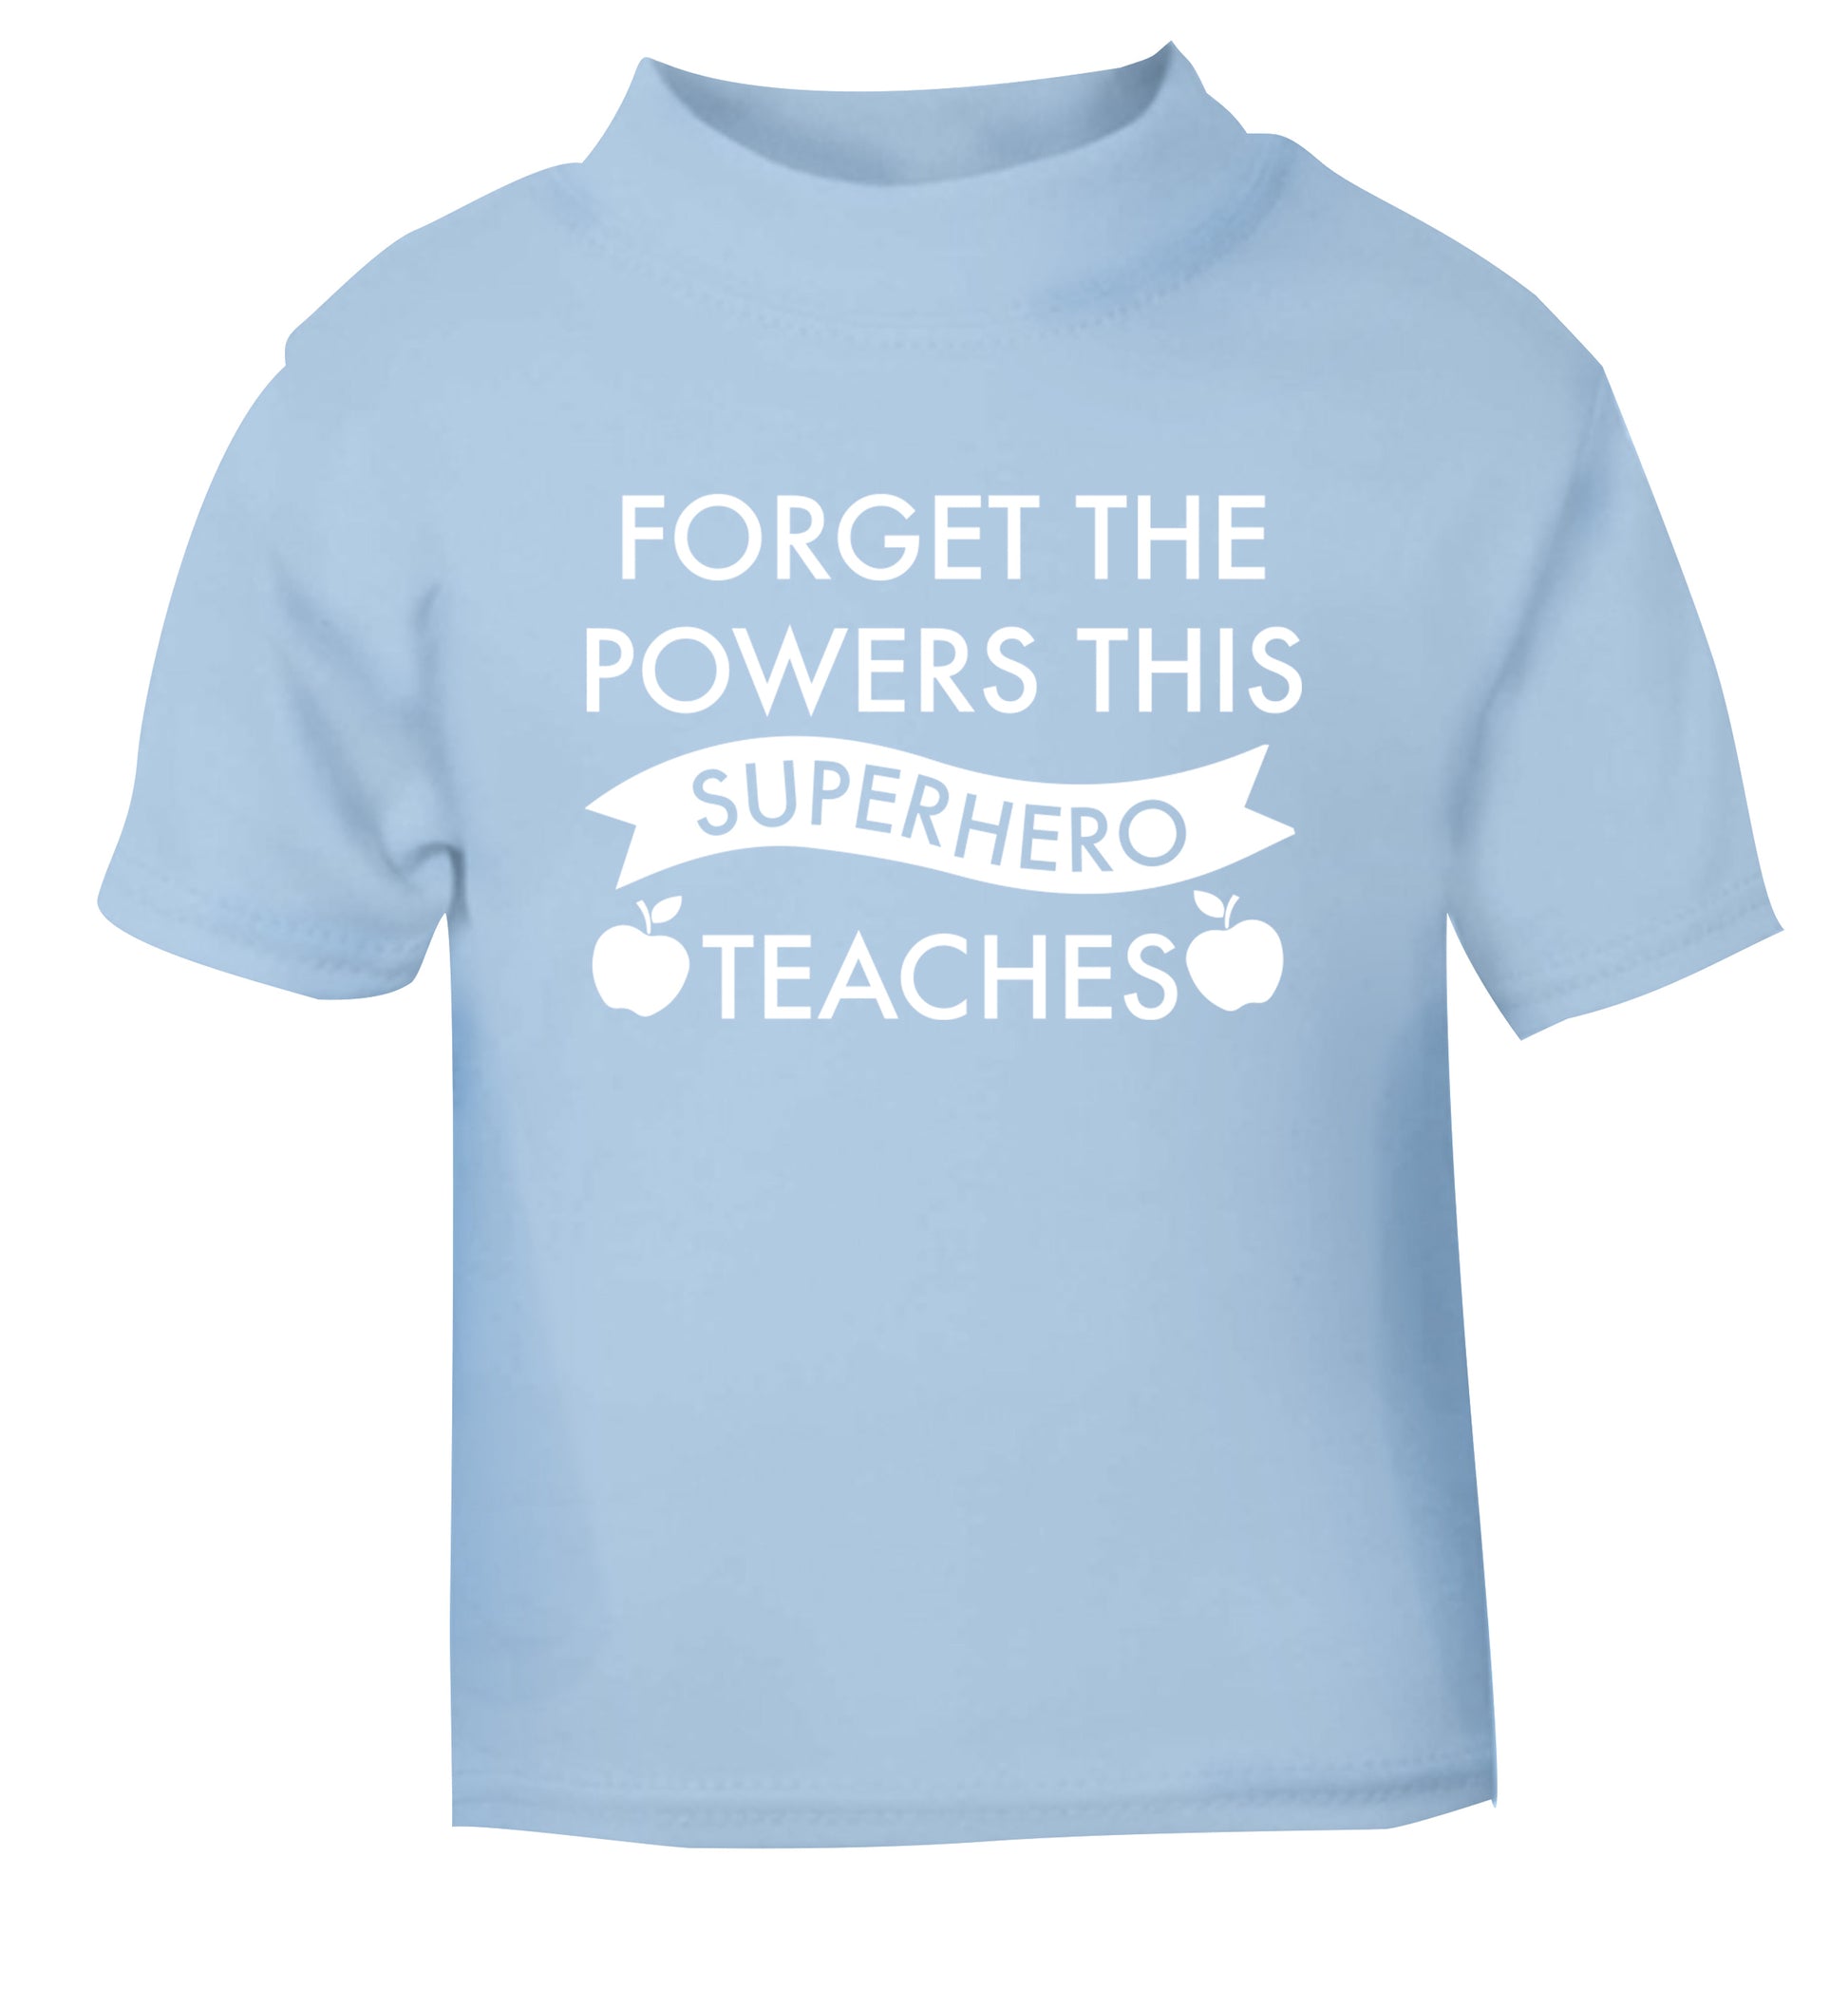 Forget the powers this superhero teaches light blue Baby Toddler Tshirt 2 Years